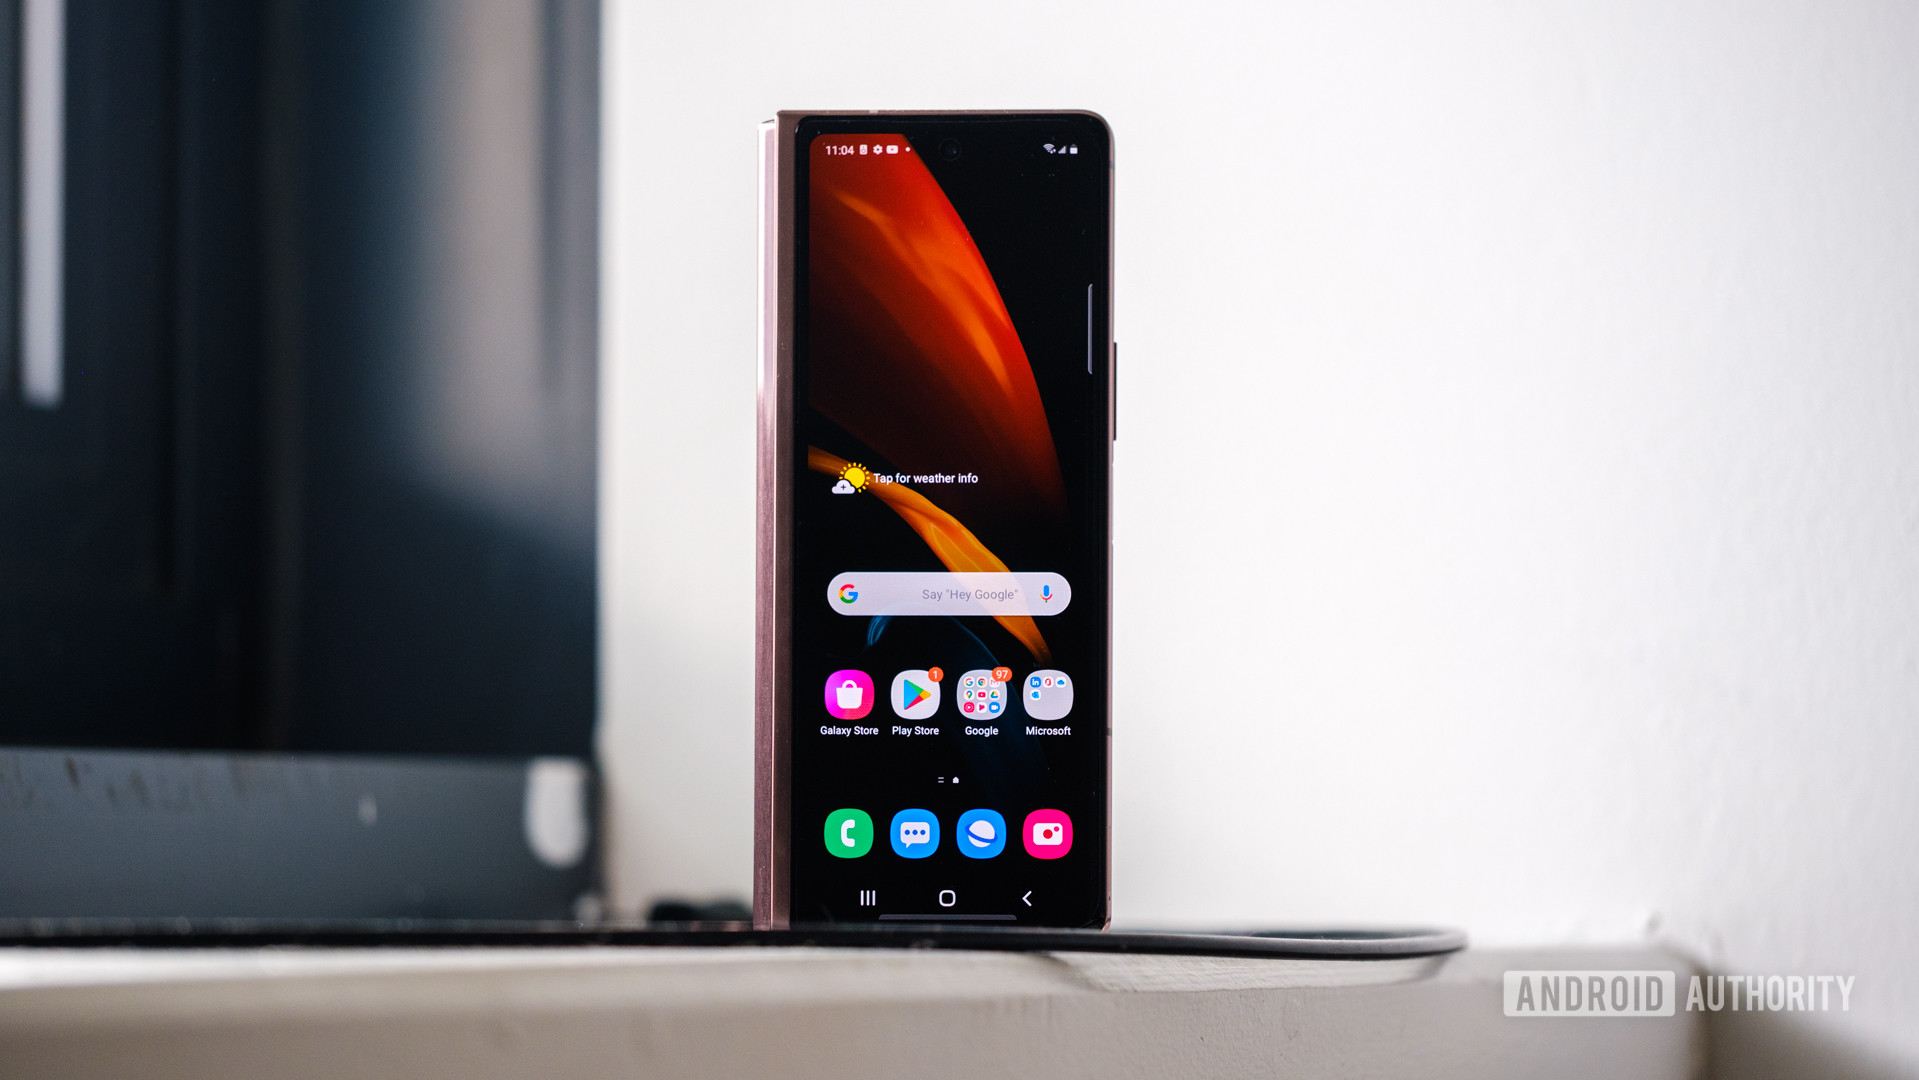 Samsung Galaxy Z Fold 2 front display standing up